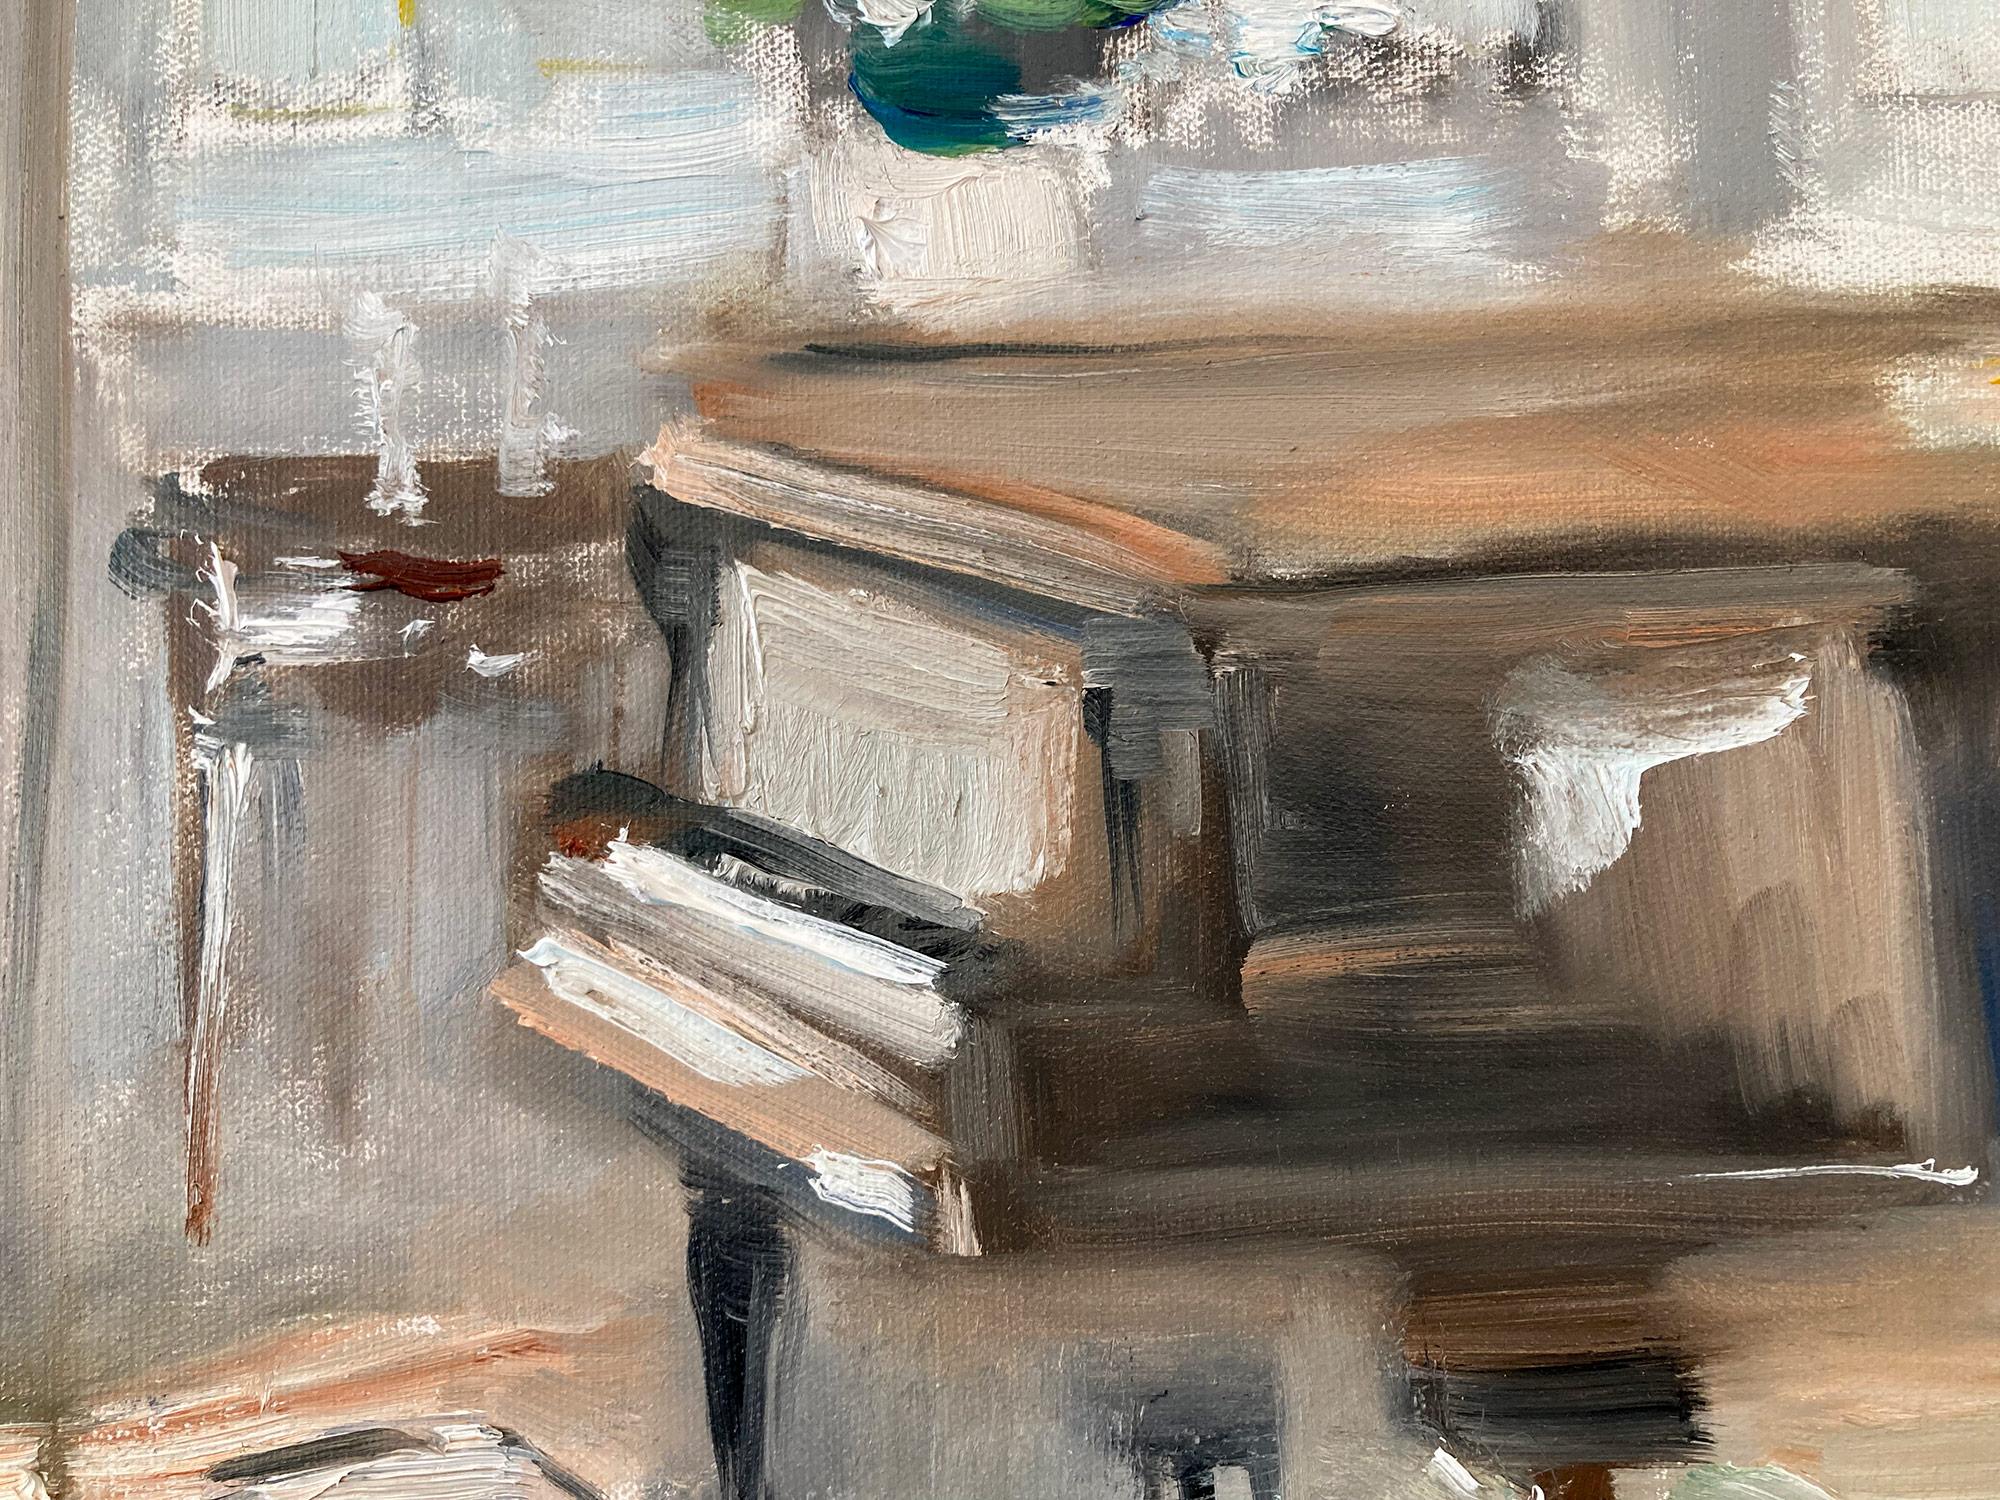 A charming depiction of an interior scene with piano. A cozy impressionistic scene with warmth and feeling. Whimsical details through out and beautiful brushwork. This piece captures the essence of a Parisian room with classic antiques, a planting